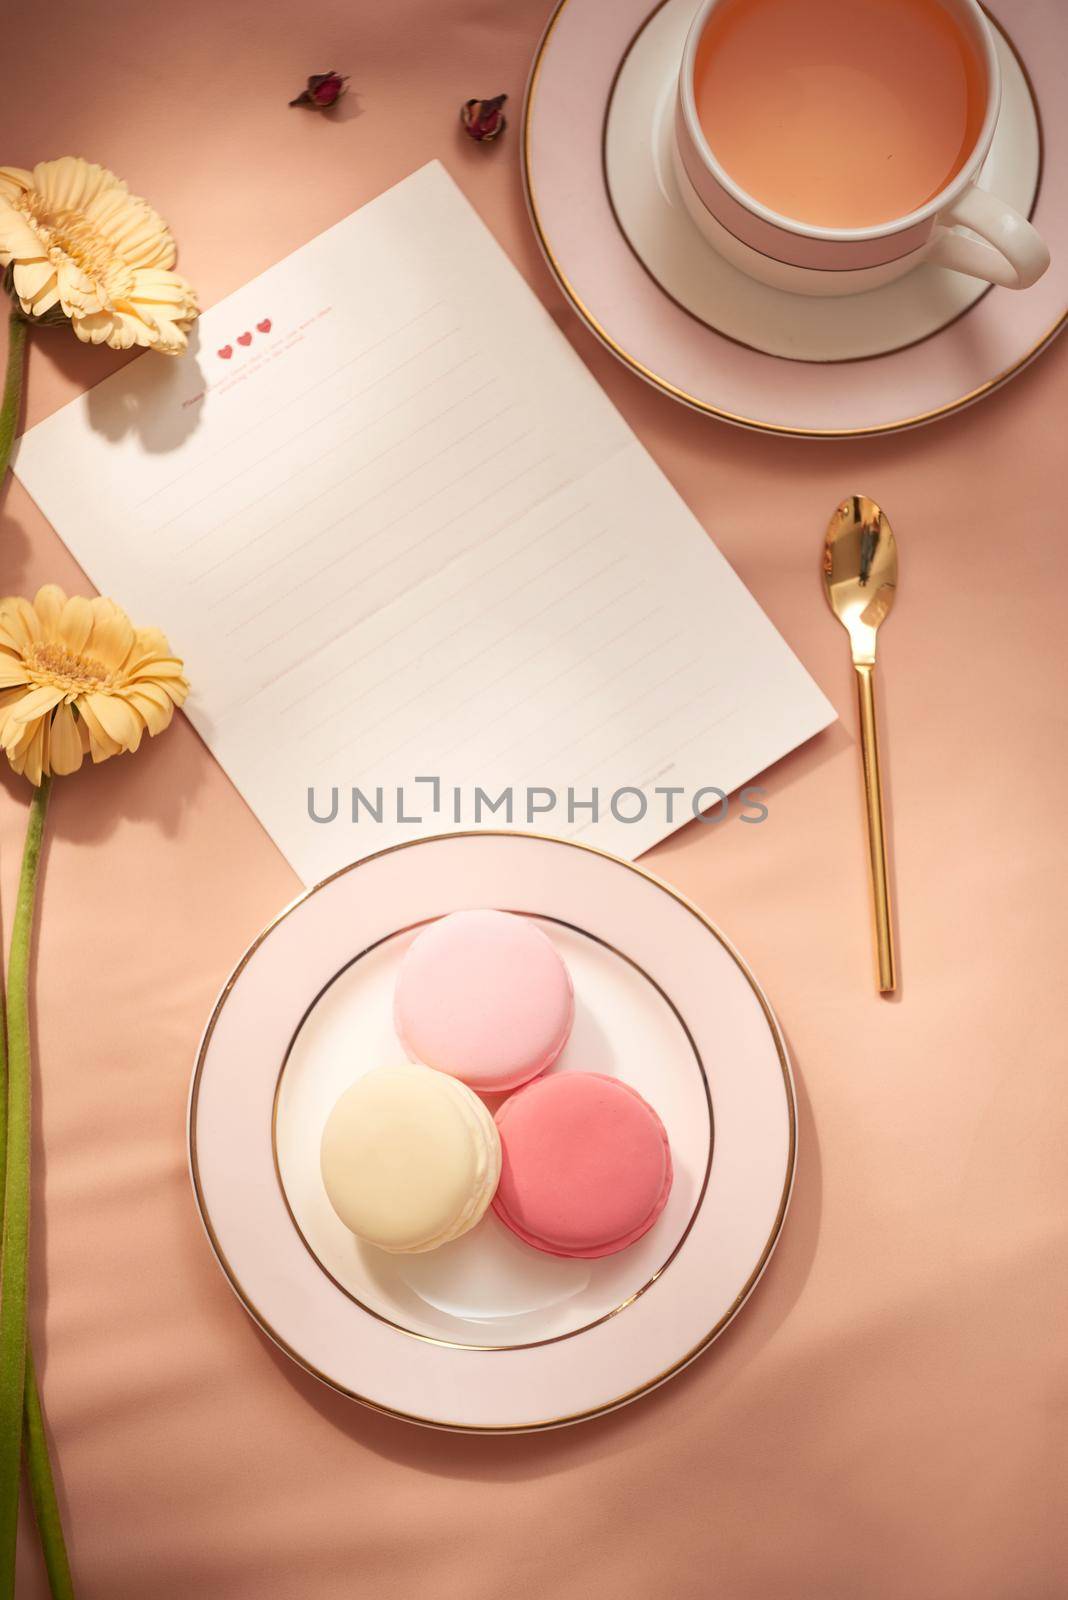 Envelope, flowers, and macarons with cup of tea  by makidotvn